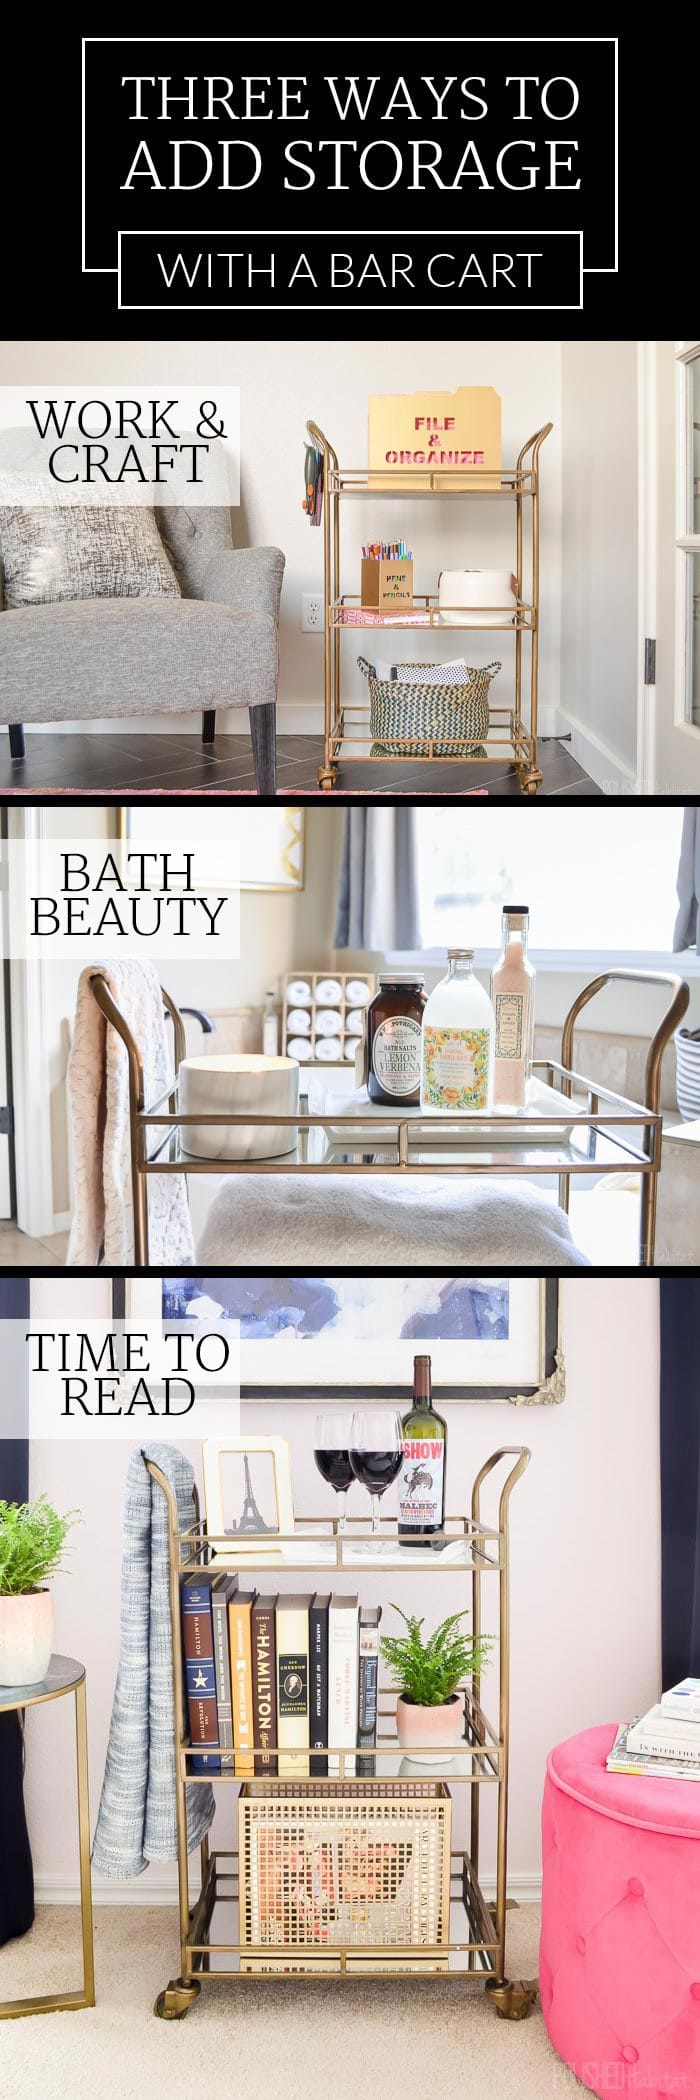 Looking for creative ways to add storage in your home? A bar cart could be a great solution! Love all these ideas - click for sources! 